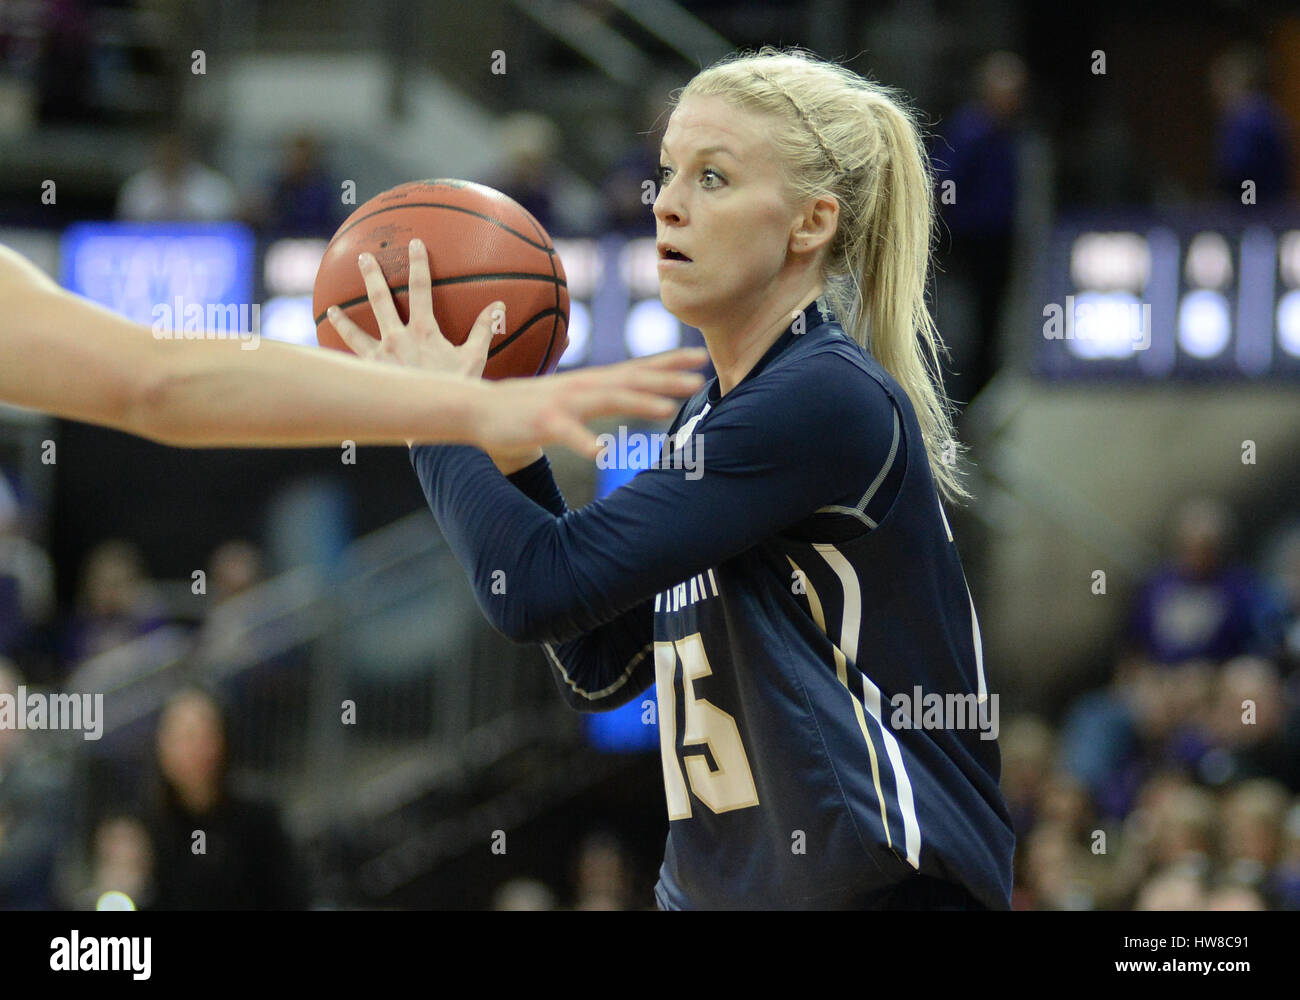 Seattle, WA, USA. 18th Mar, 2017. Montana State guard Riley Nordgaard (15) in action during a NCAA first round women's game between the Montana State Bobcats and the Washington Huskies. The game was played at Hec Ed Pavilion on the University of Washington campus in Seattle, WA. Jeff Halstead/CSM/Alamy Live News Stock Photo